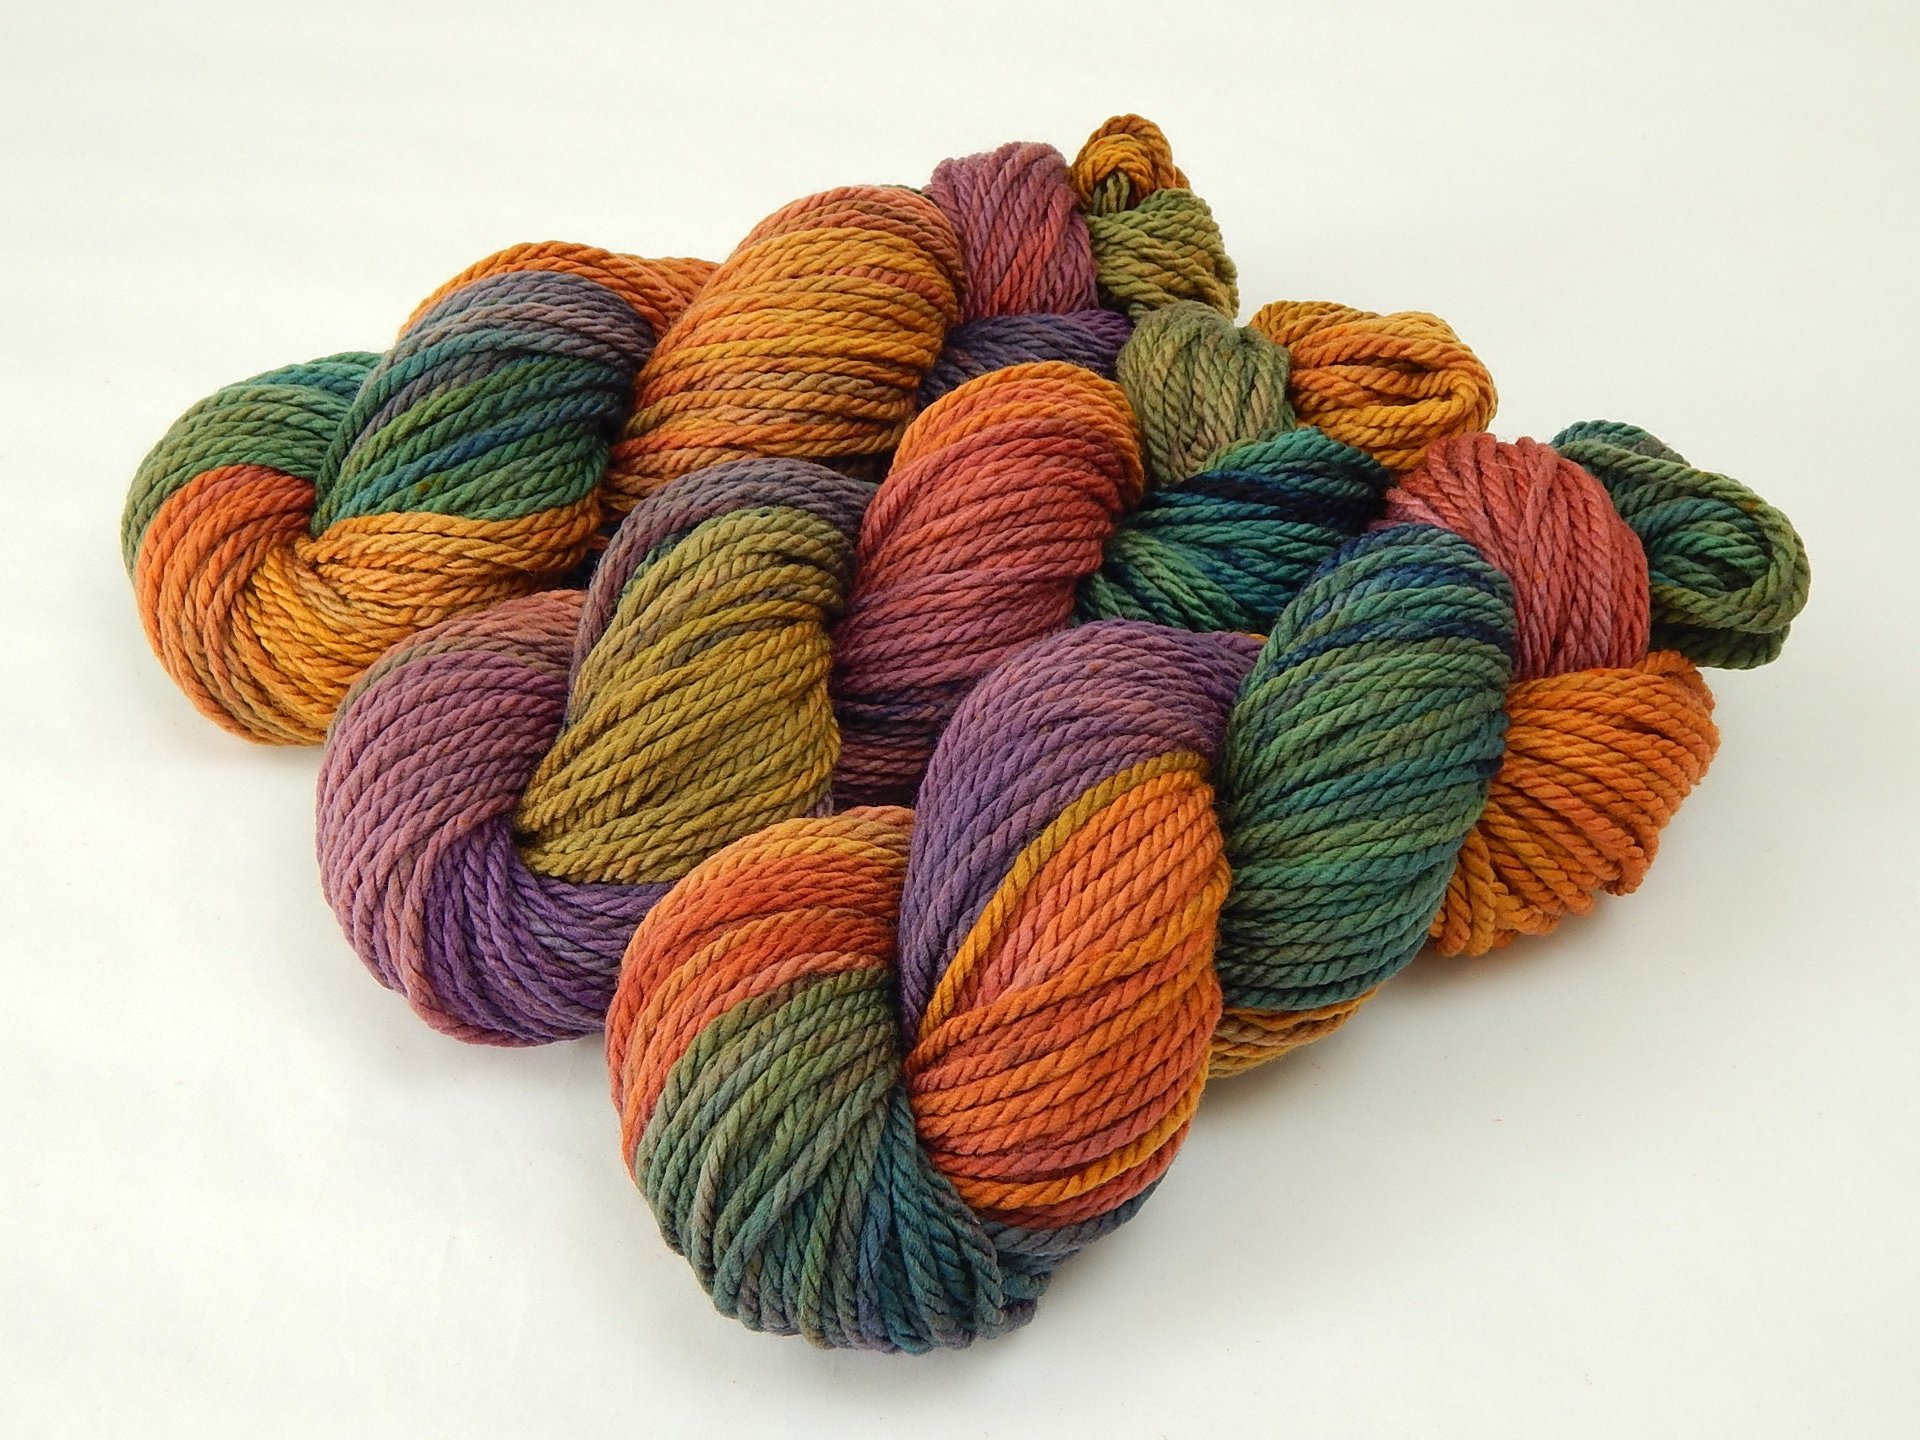 Hand Dyed Yarn, Bulky Weight Superwash Merino Wool - Potluck Rainbow - Indie Dyer Bright Colorful Thick Chunky Knitting Yarn, Ready to Ship